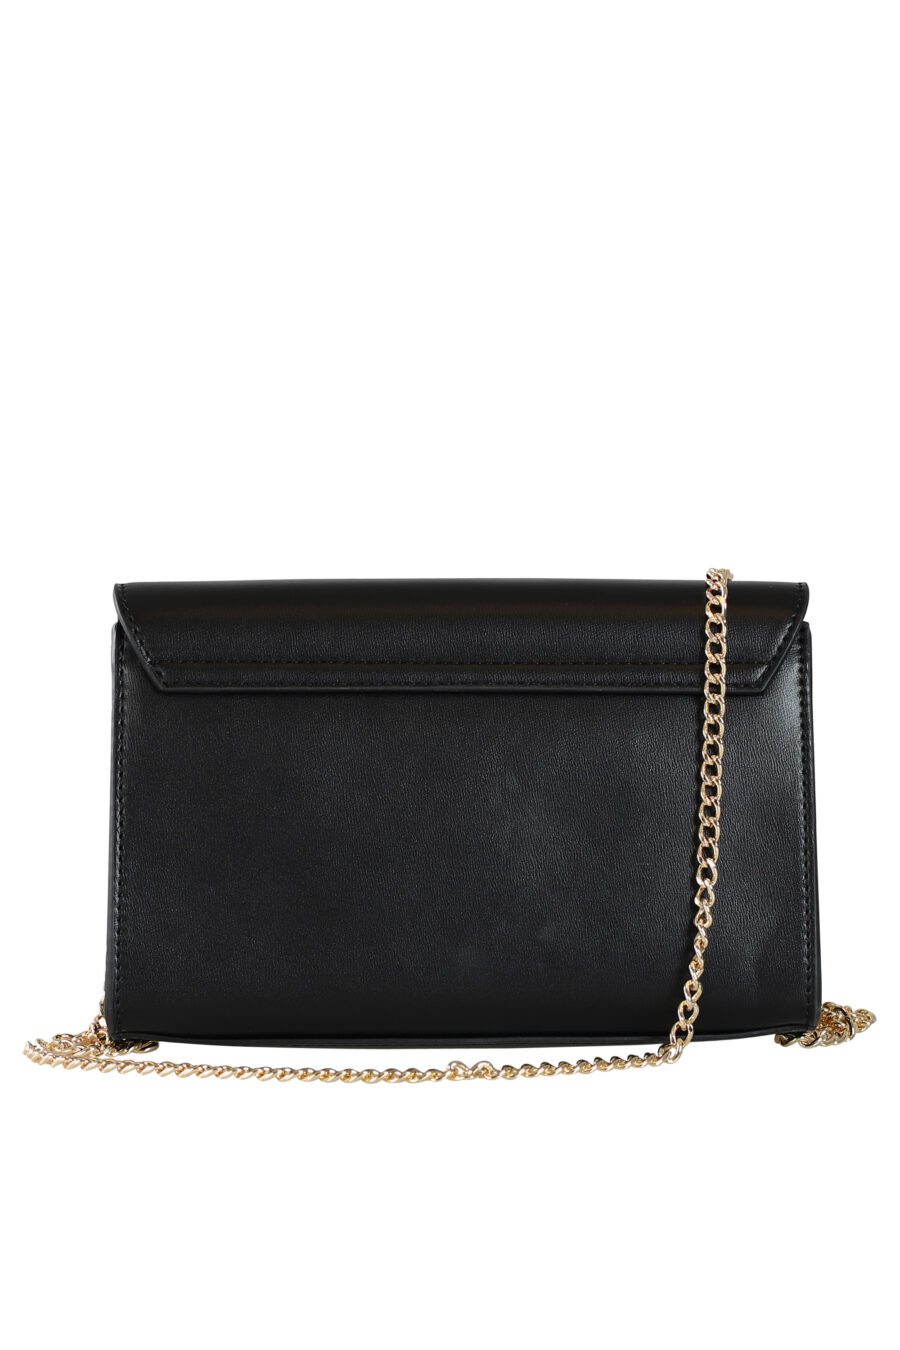 Black shoulder bag with gold maxilogo and chain - 8059965990439 3